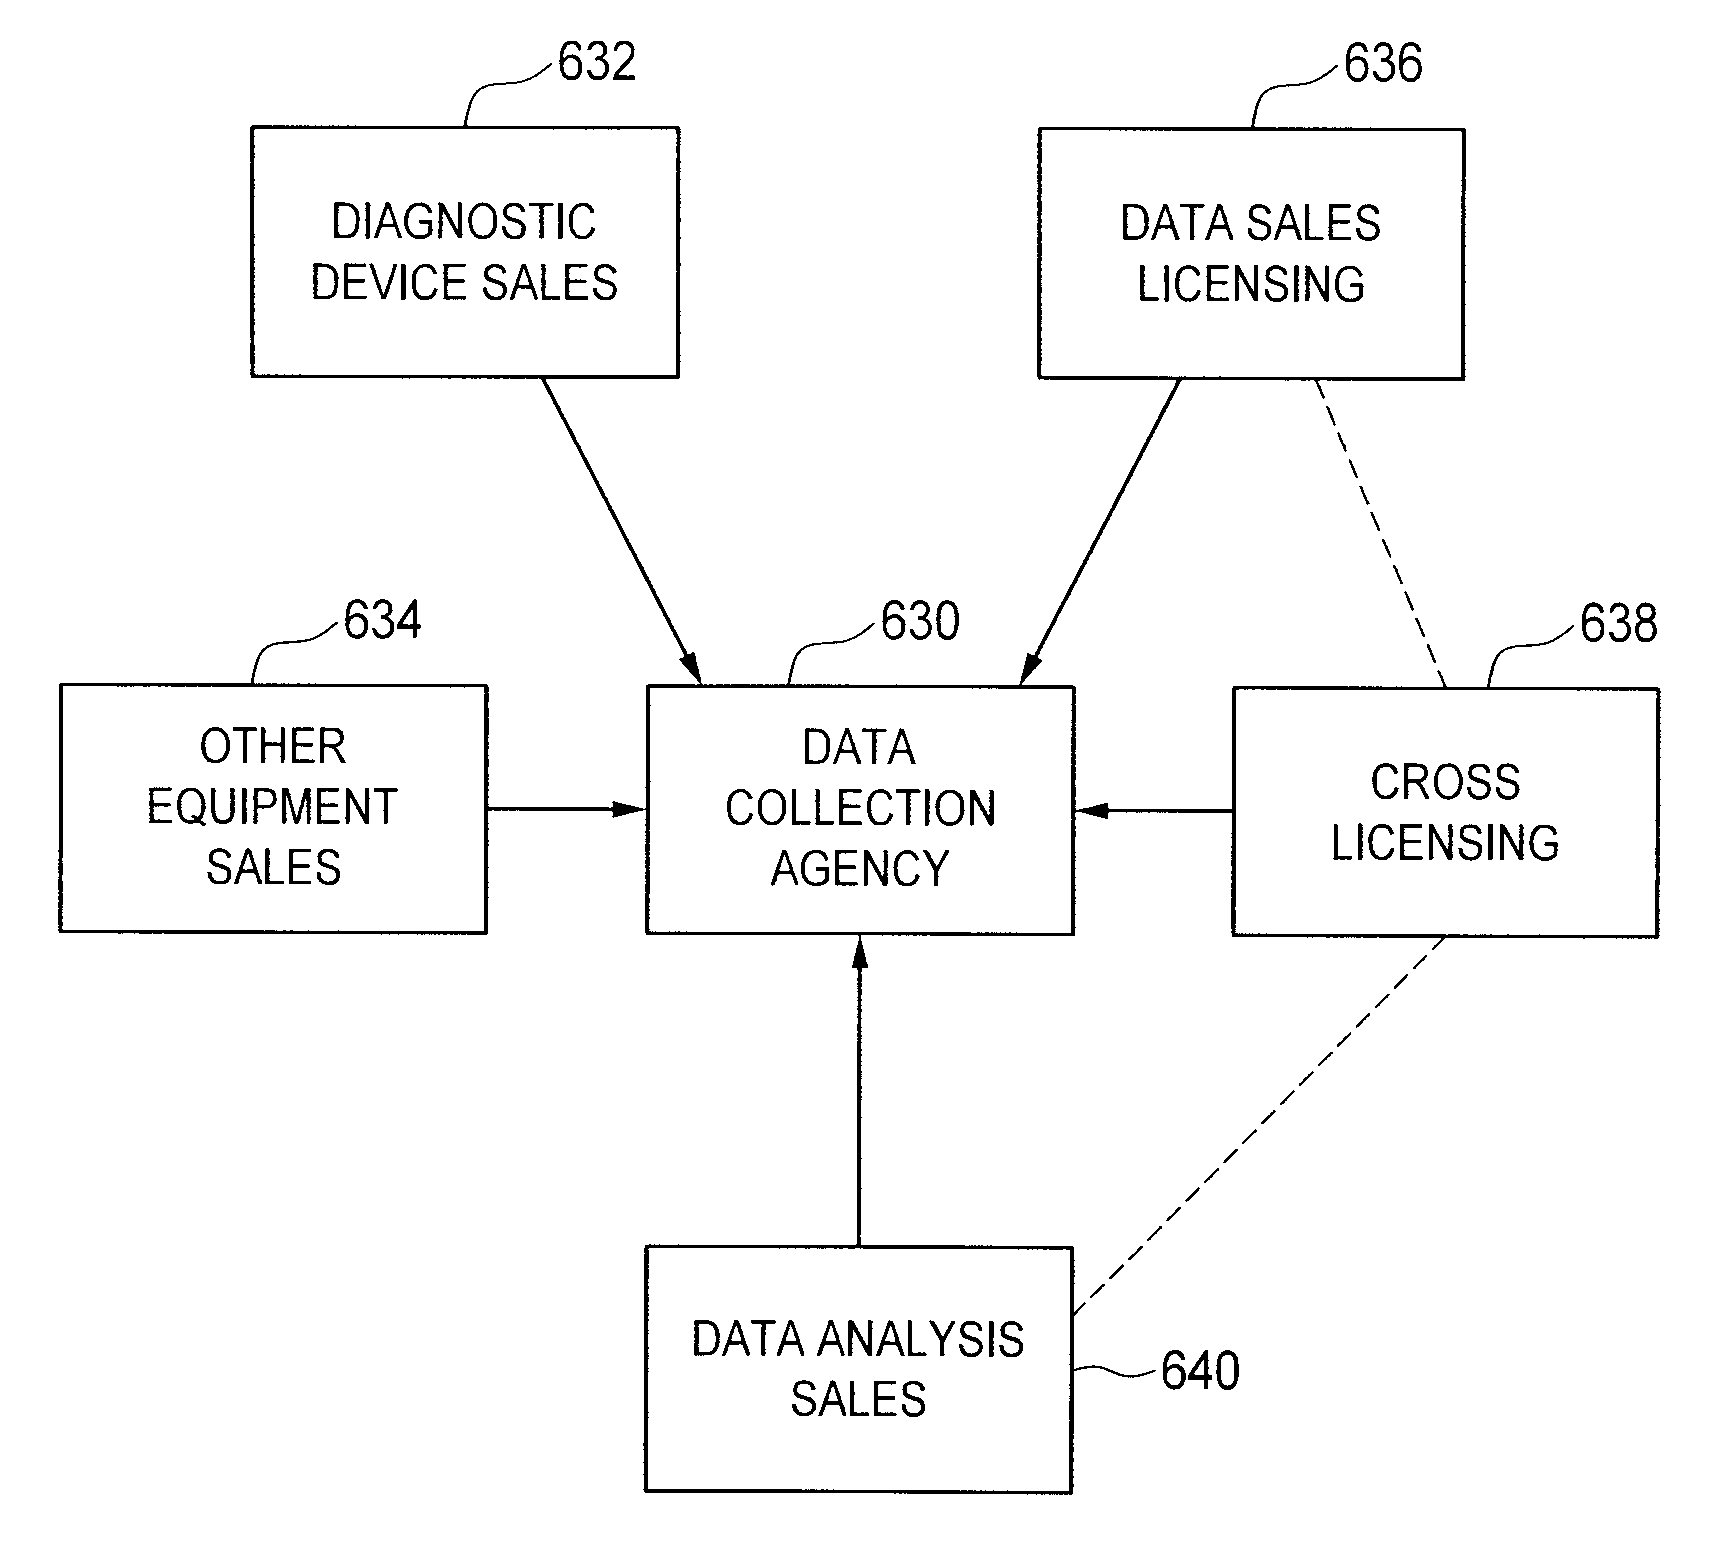 Method and system for collating, storing, analyzing and enabling access to collected and analyzed data associated with biological and environmental test subjects